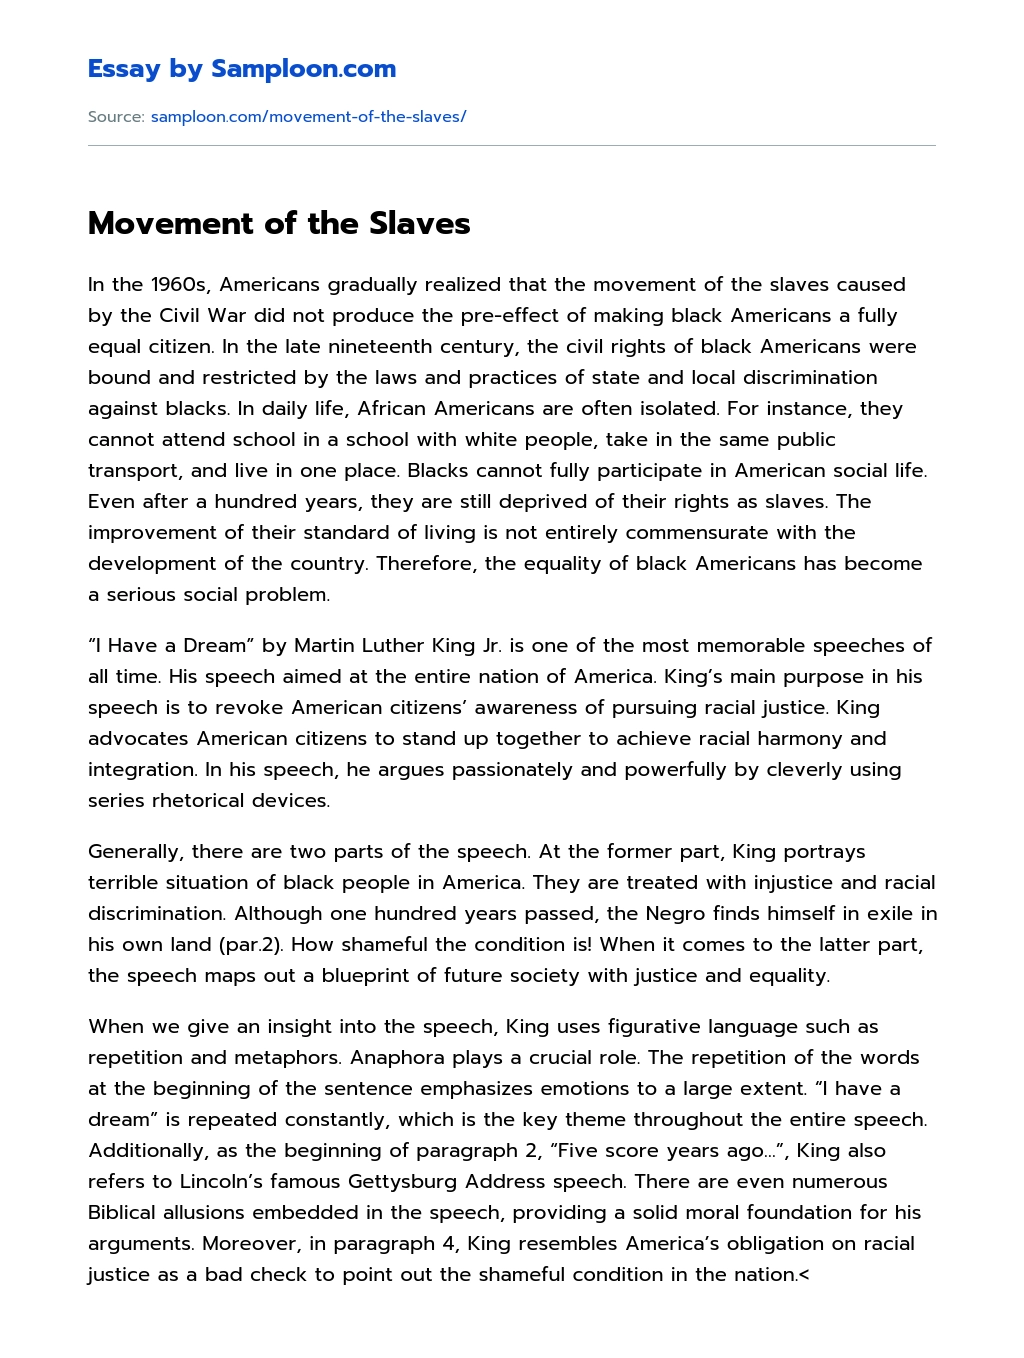 Movement of the Slaves essay